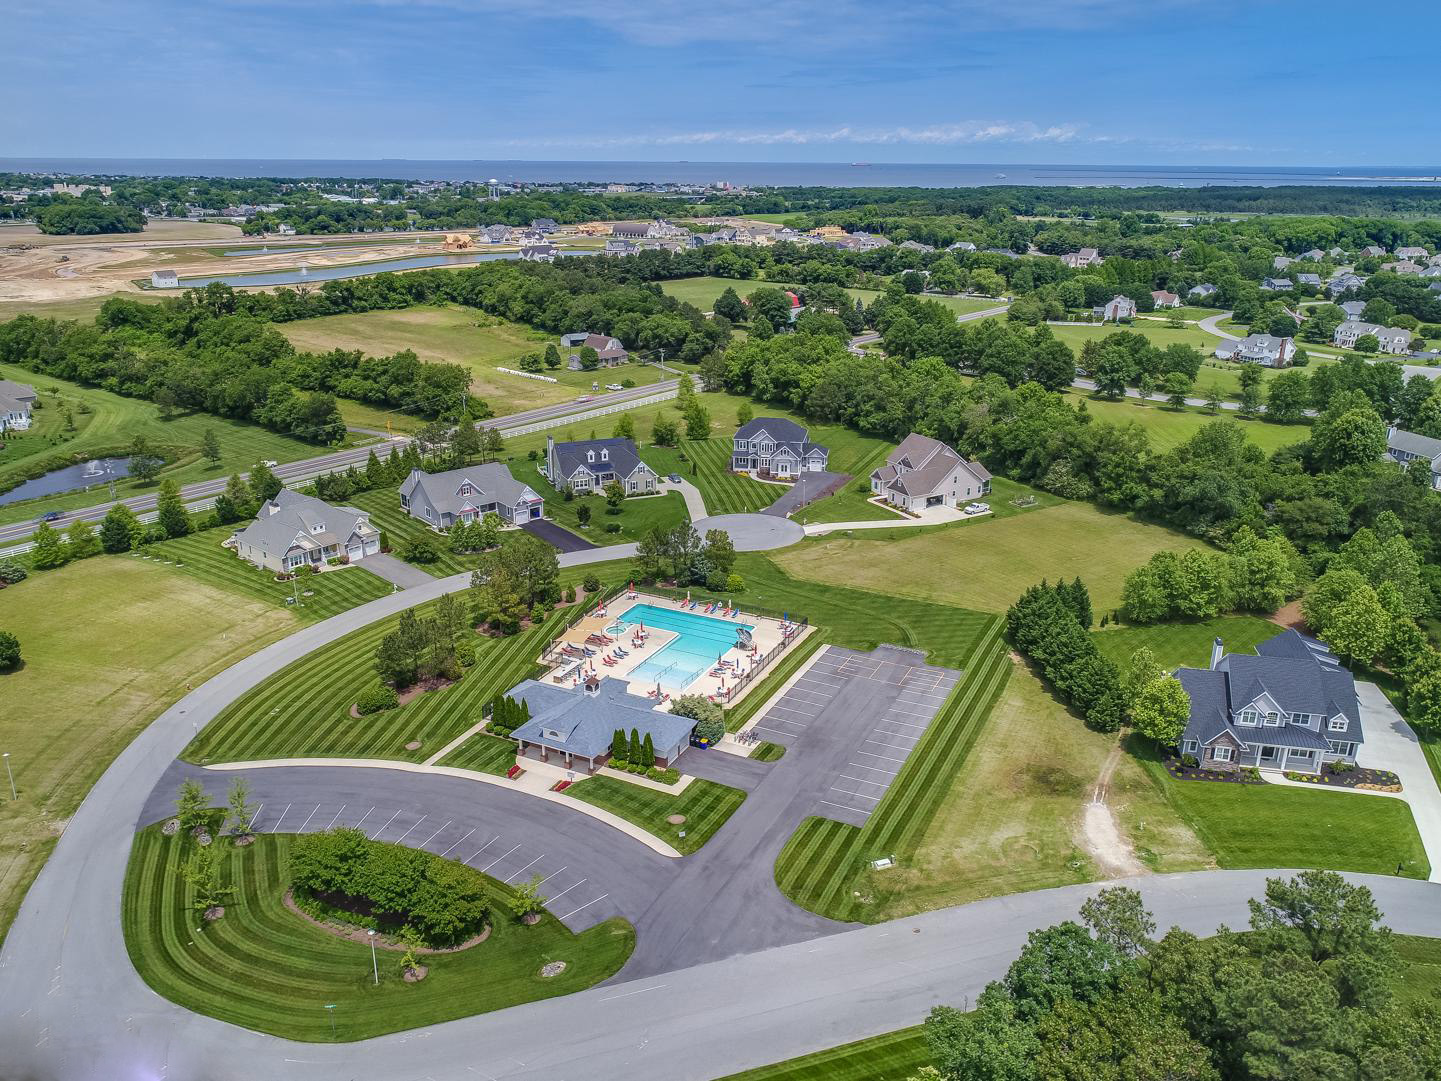 Streets aerial view  and community pool | Hawkseye, Lewes, Delaware HOA Home Owners Association